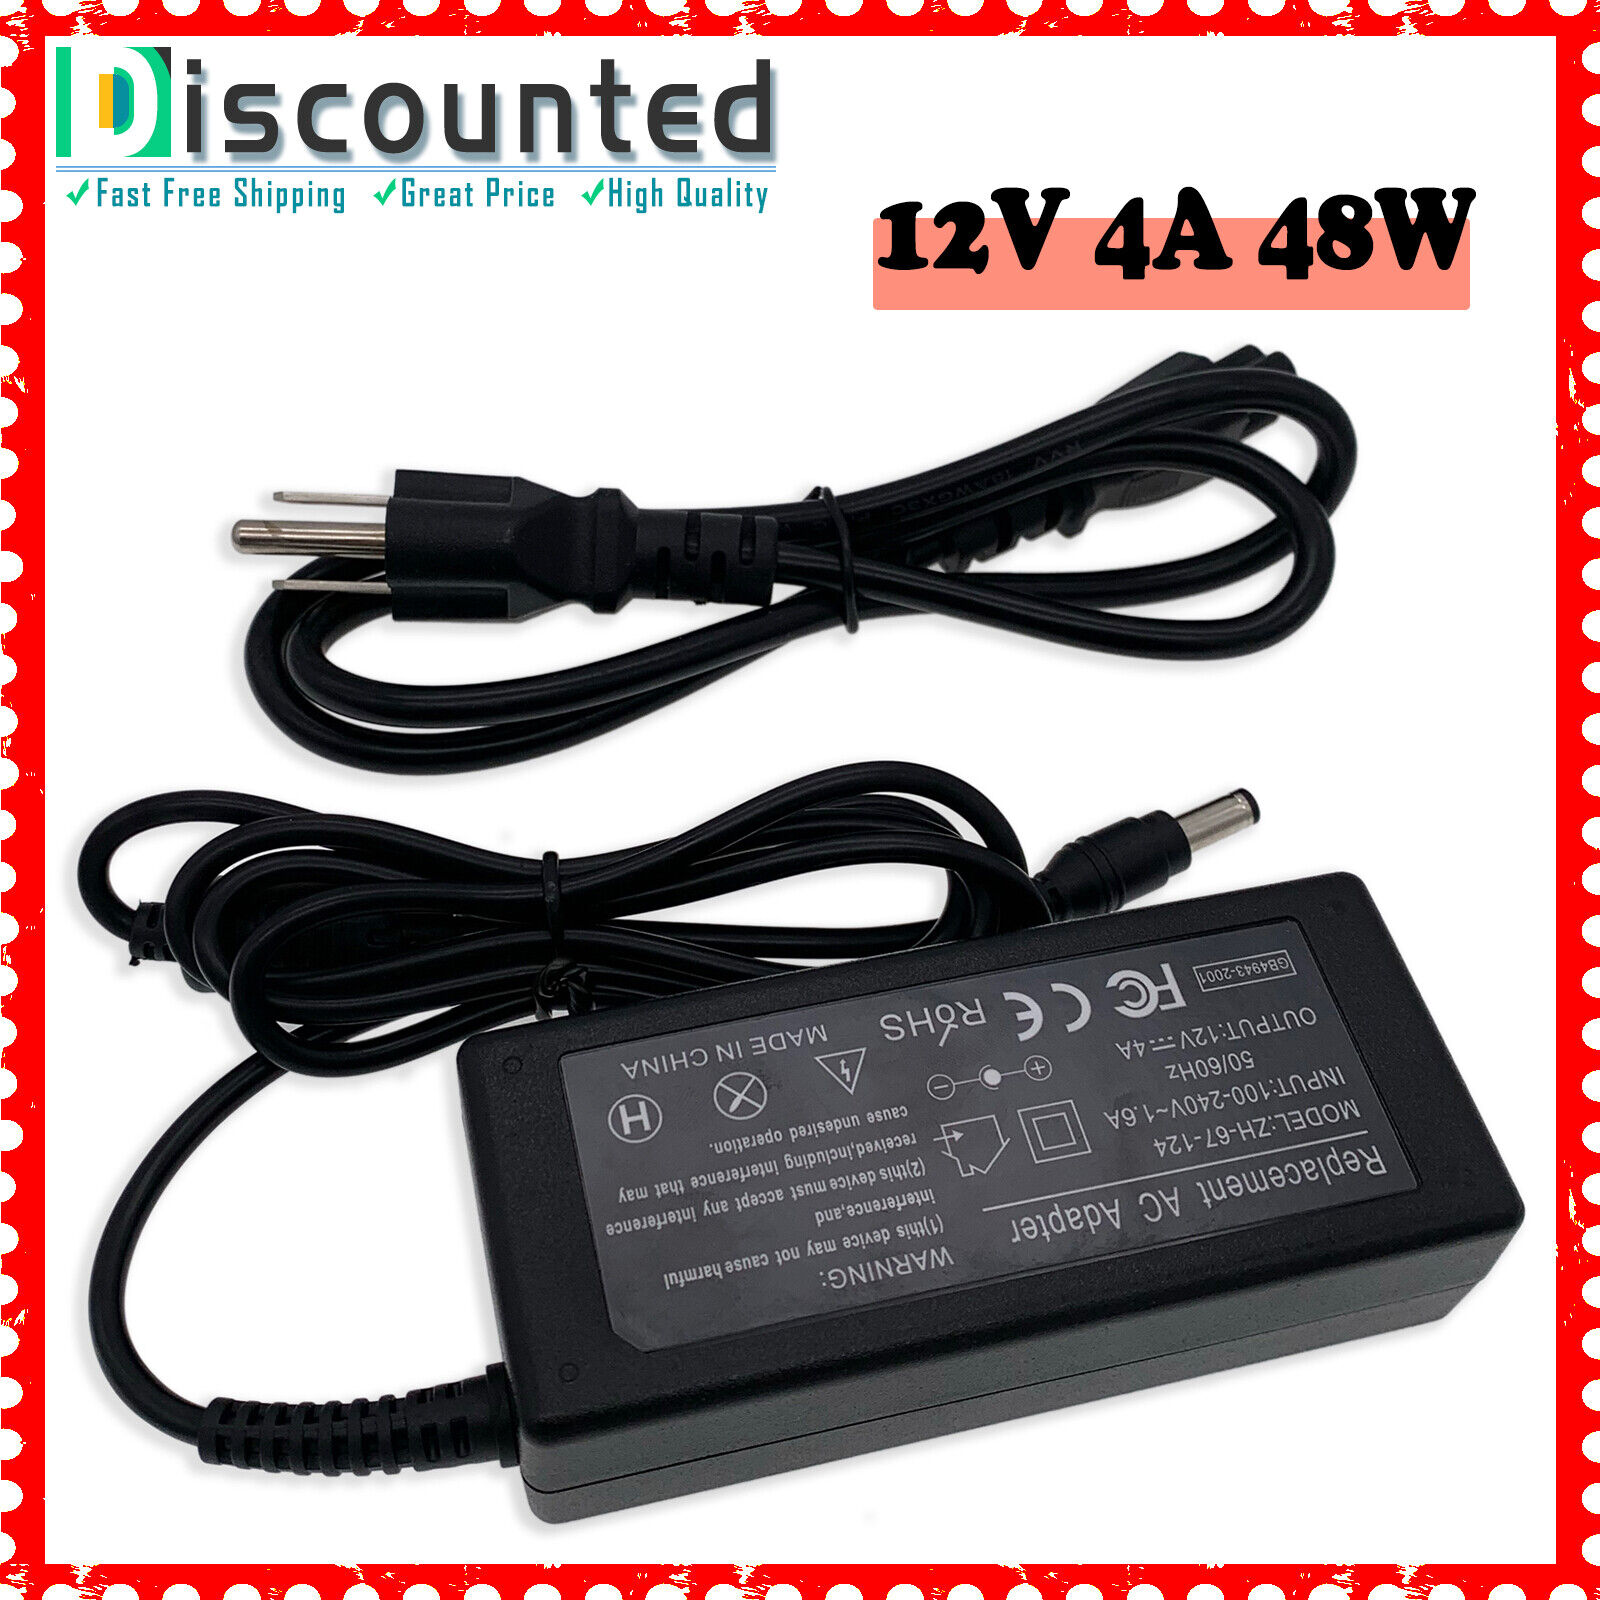 New 12V AC Adapter Charger for TASCAM DP-01FX/CD Porta Studio Power Supply Cord